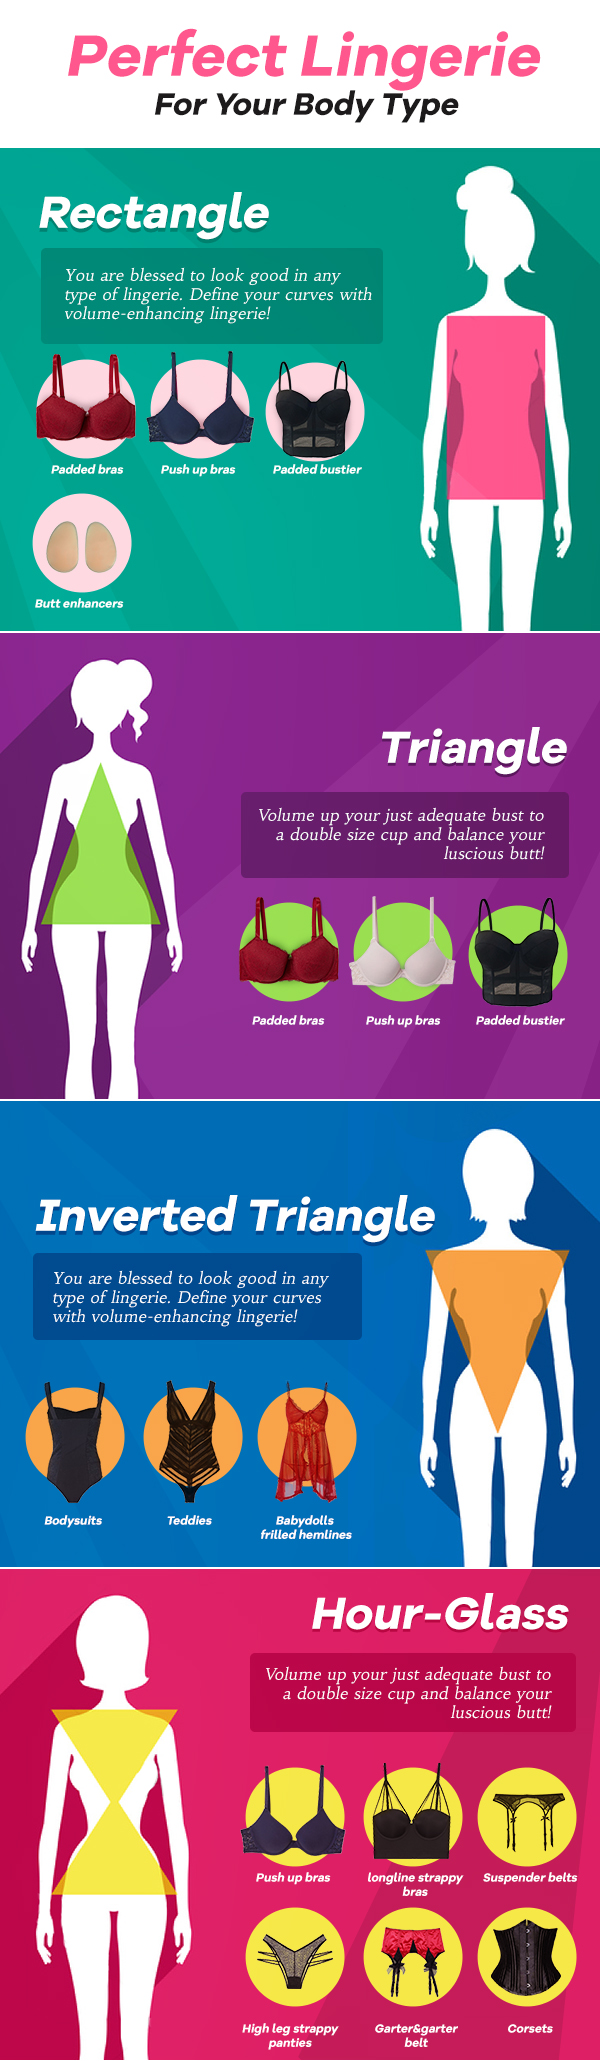 Perfect-Lingerie-For-Your-Bodytype